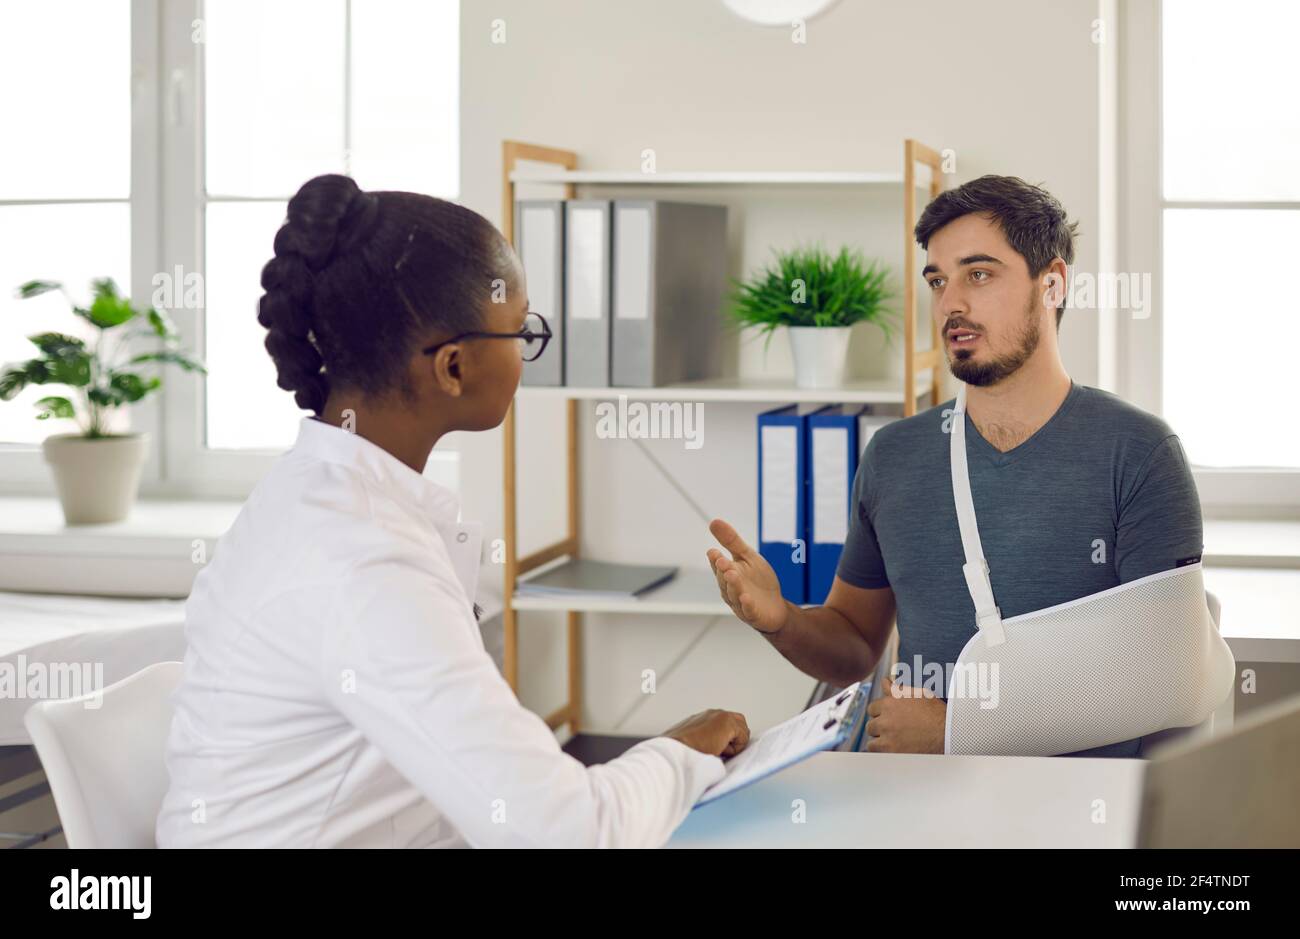 Caucasian man patient and afro american doctor consultation in hospital room Stock Photo